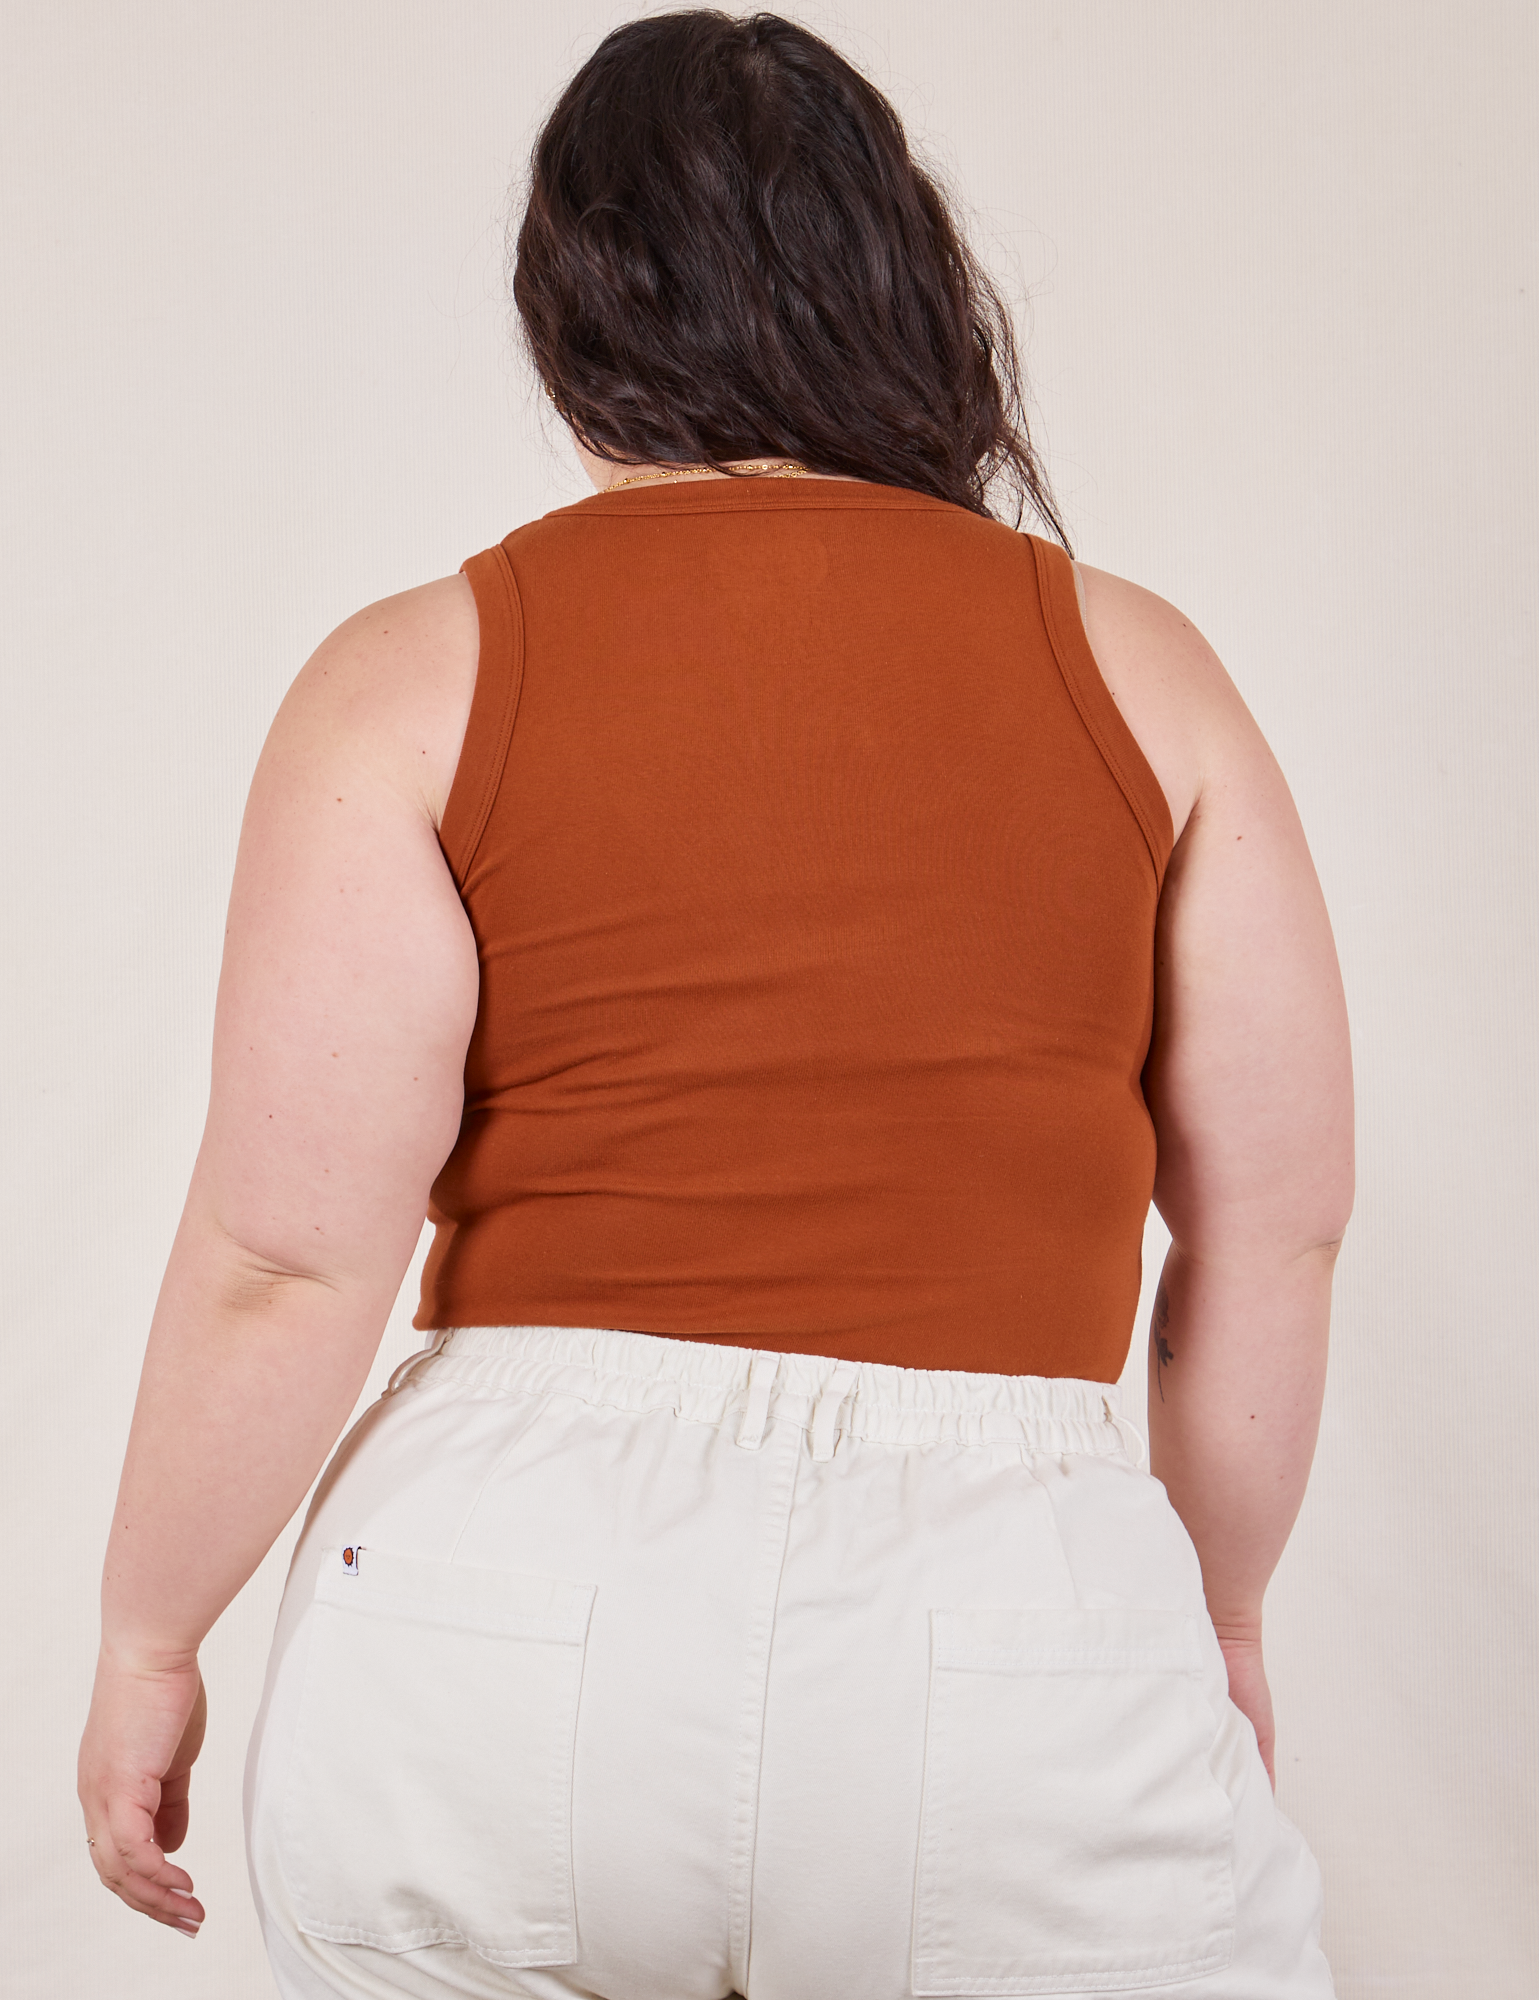 The Tank Top in Burnt Terracotta back view on Ashley